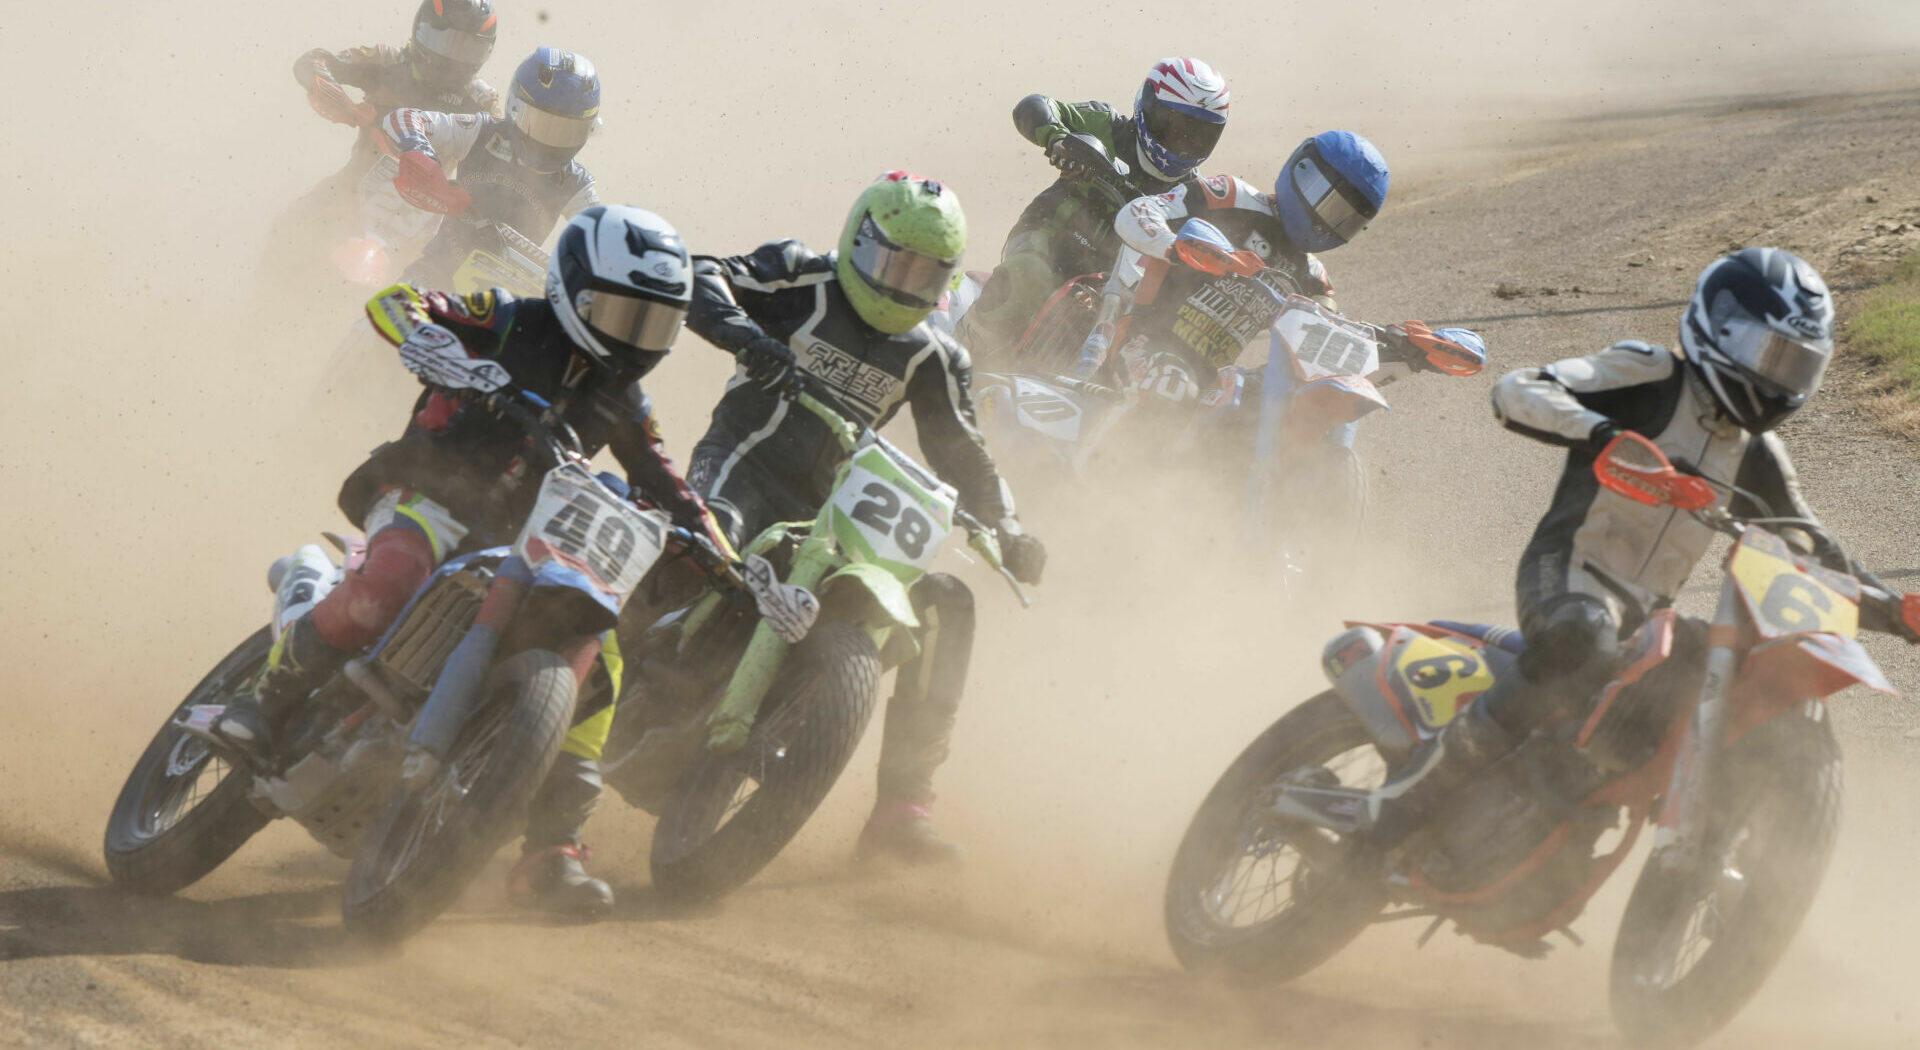 Action from the AMA Flat Track Grand Championship in 2020. Photo courtesy AMA.